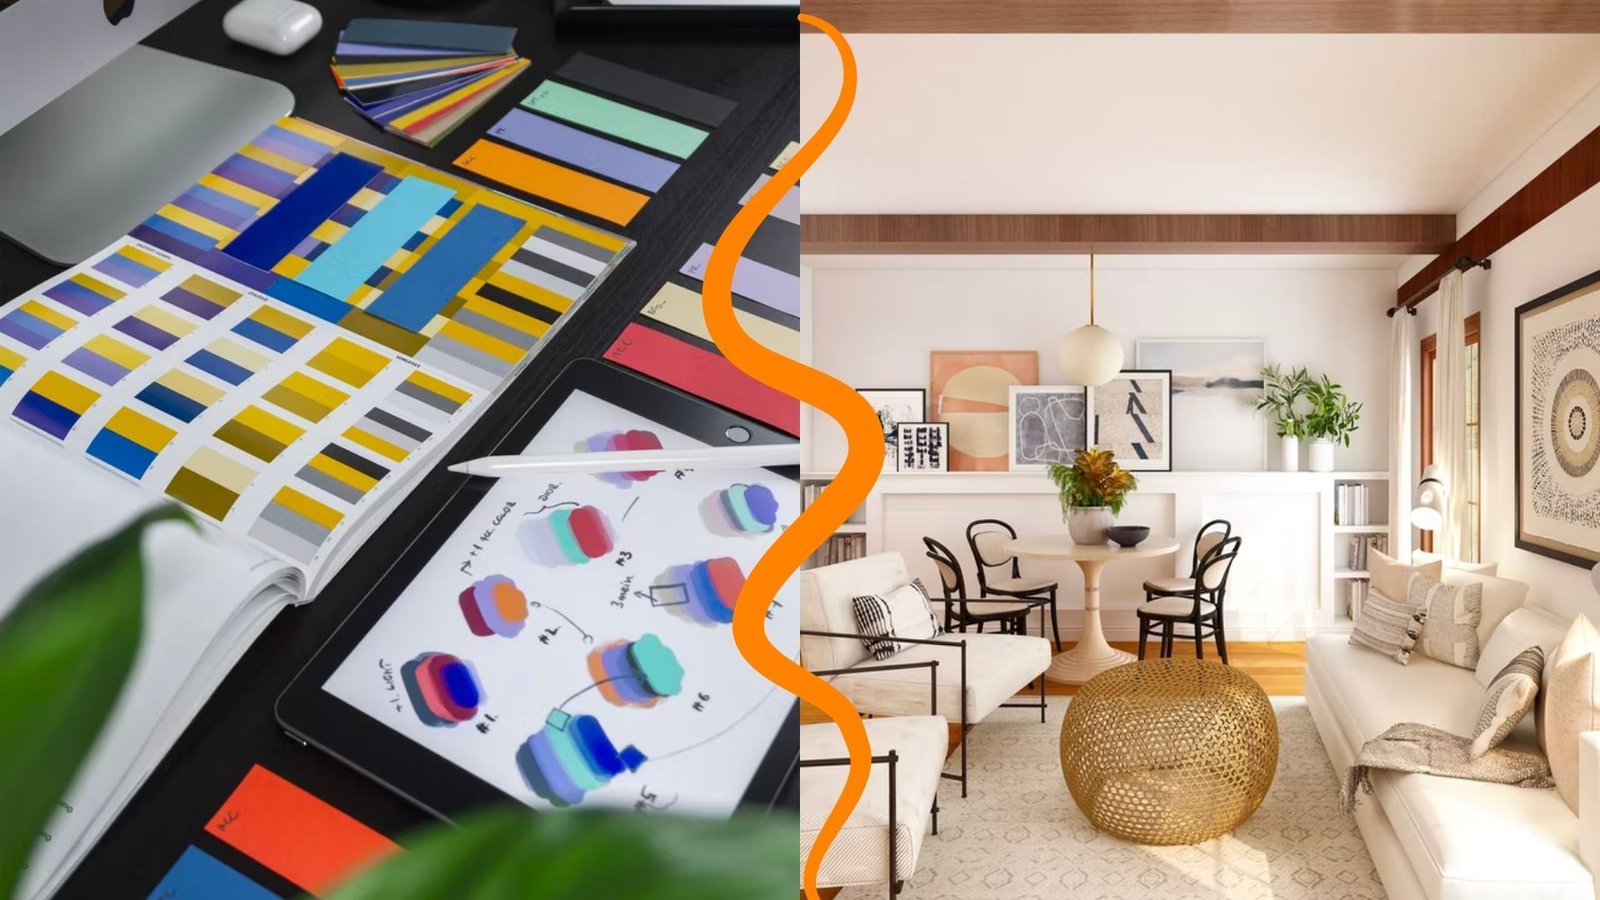 Graphic Design Vs Interior Design Is There An Overlap 